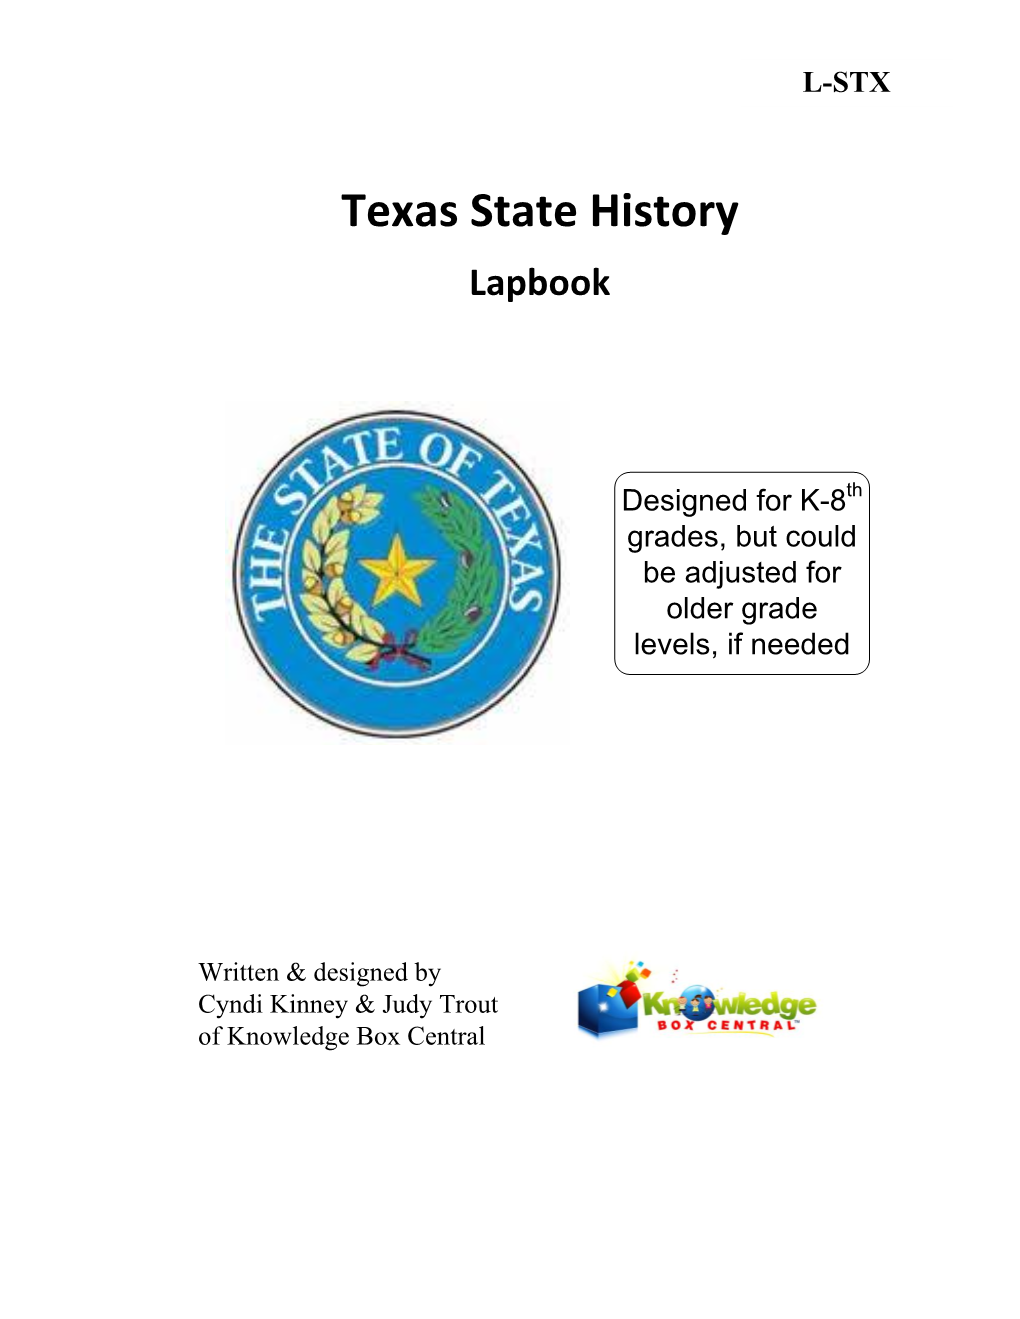 Texas State History Lapbook